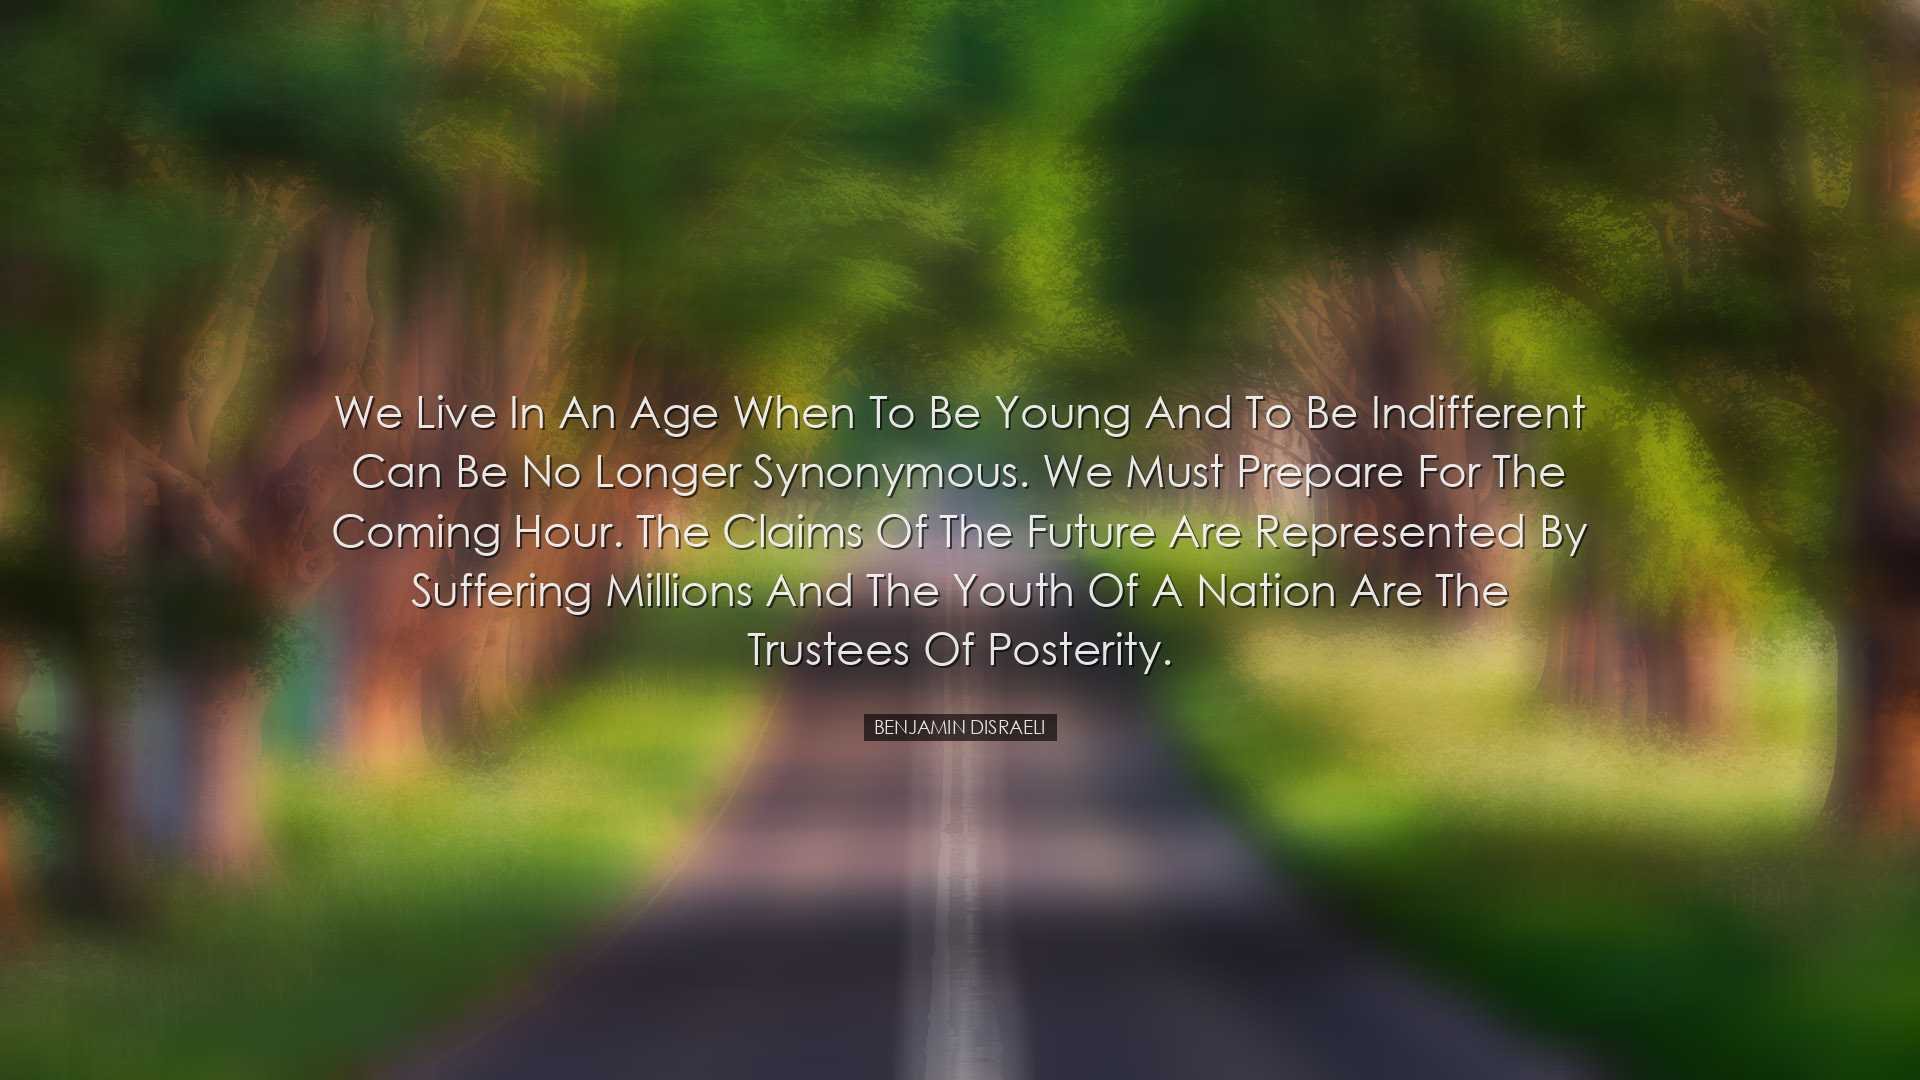 We live in an age when to be young and to be indifferent can be no